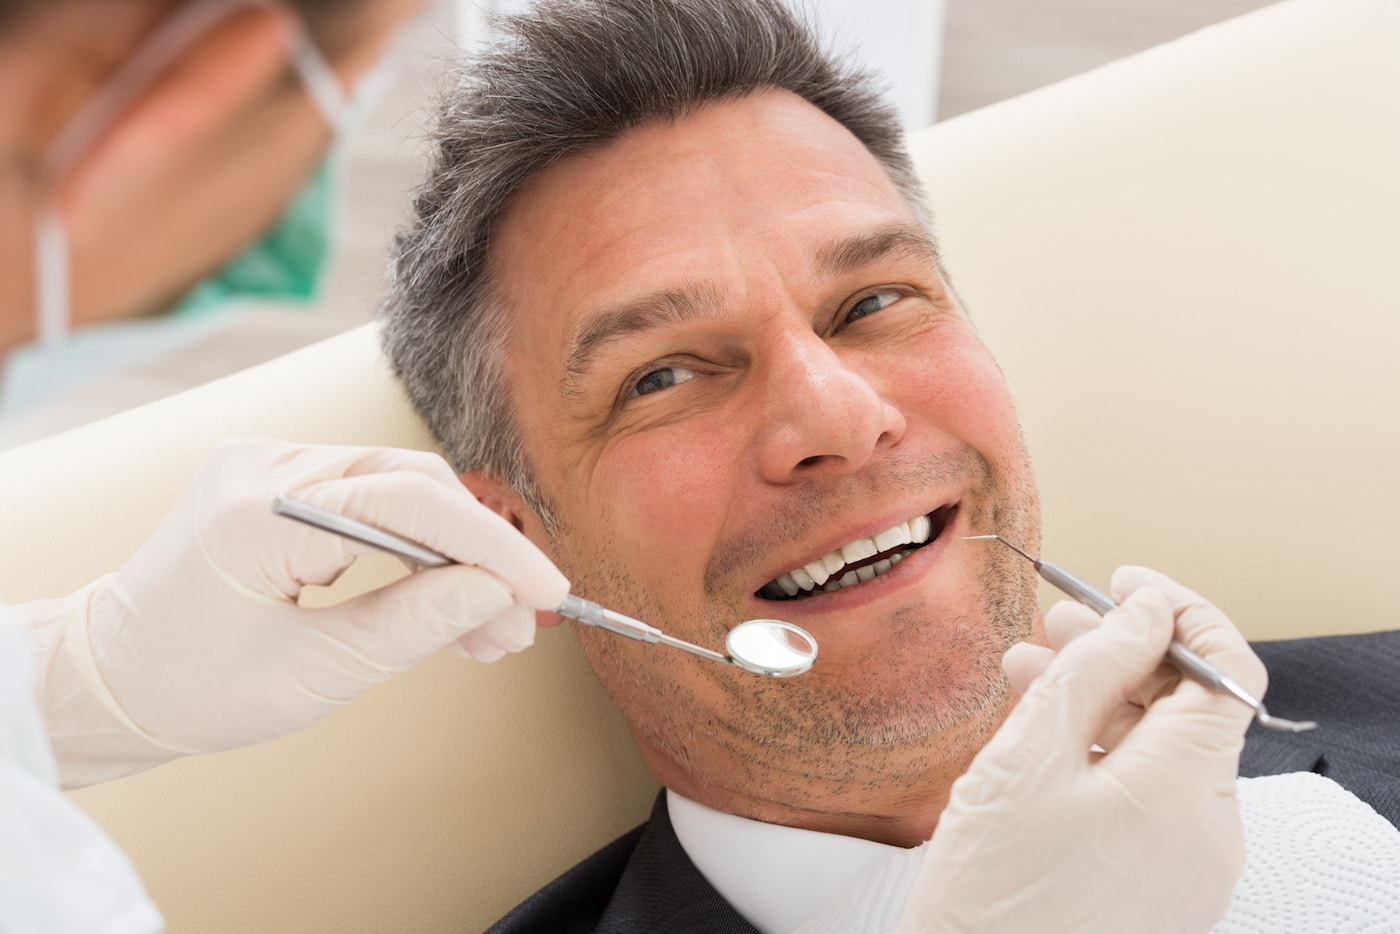 Over 50 male getting dental check-up